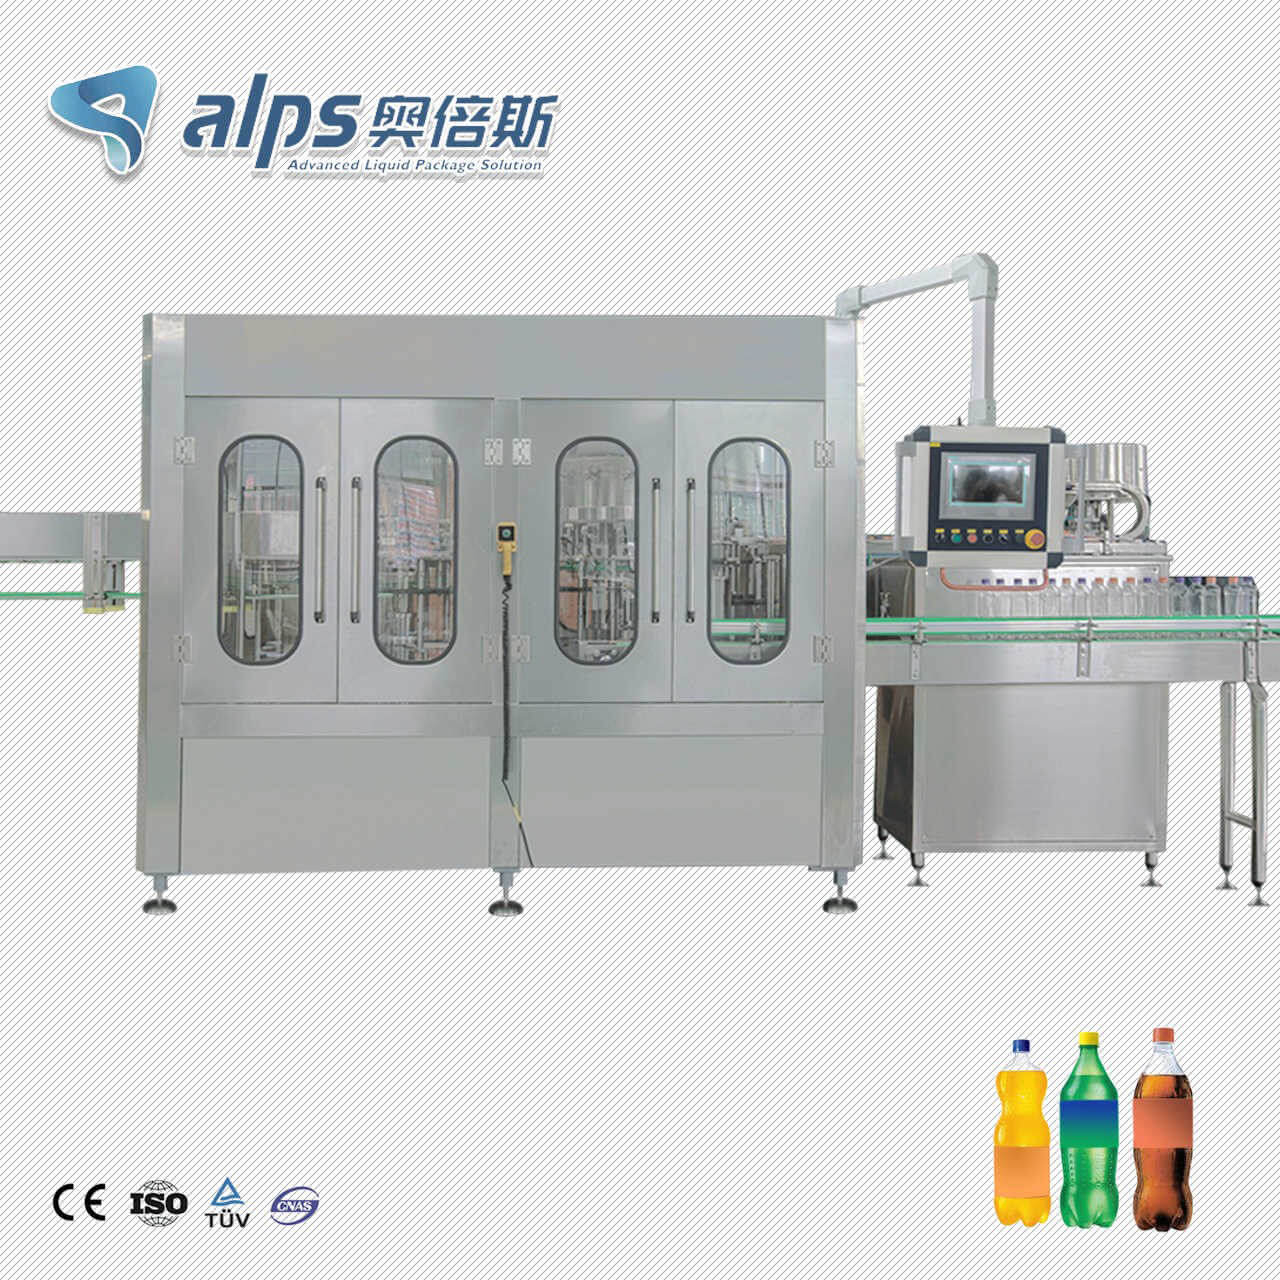 How beverage filling machines ensure hygiene standards and quality control of the filling process